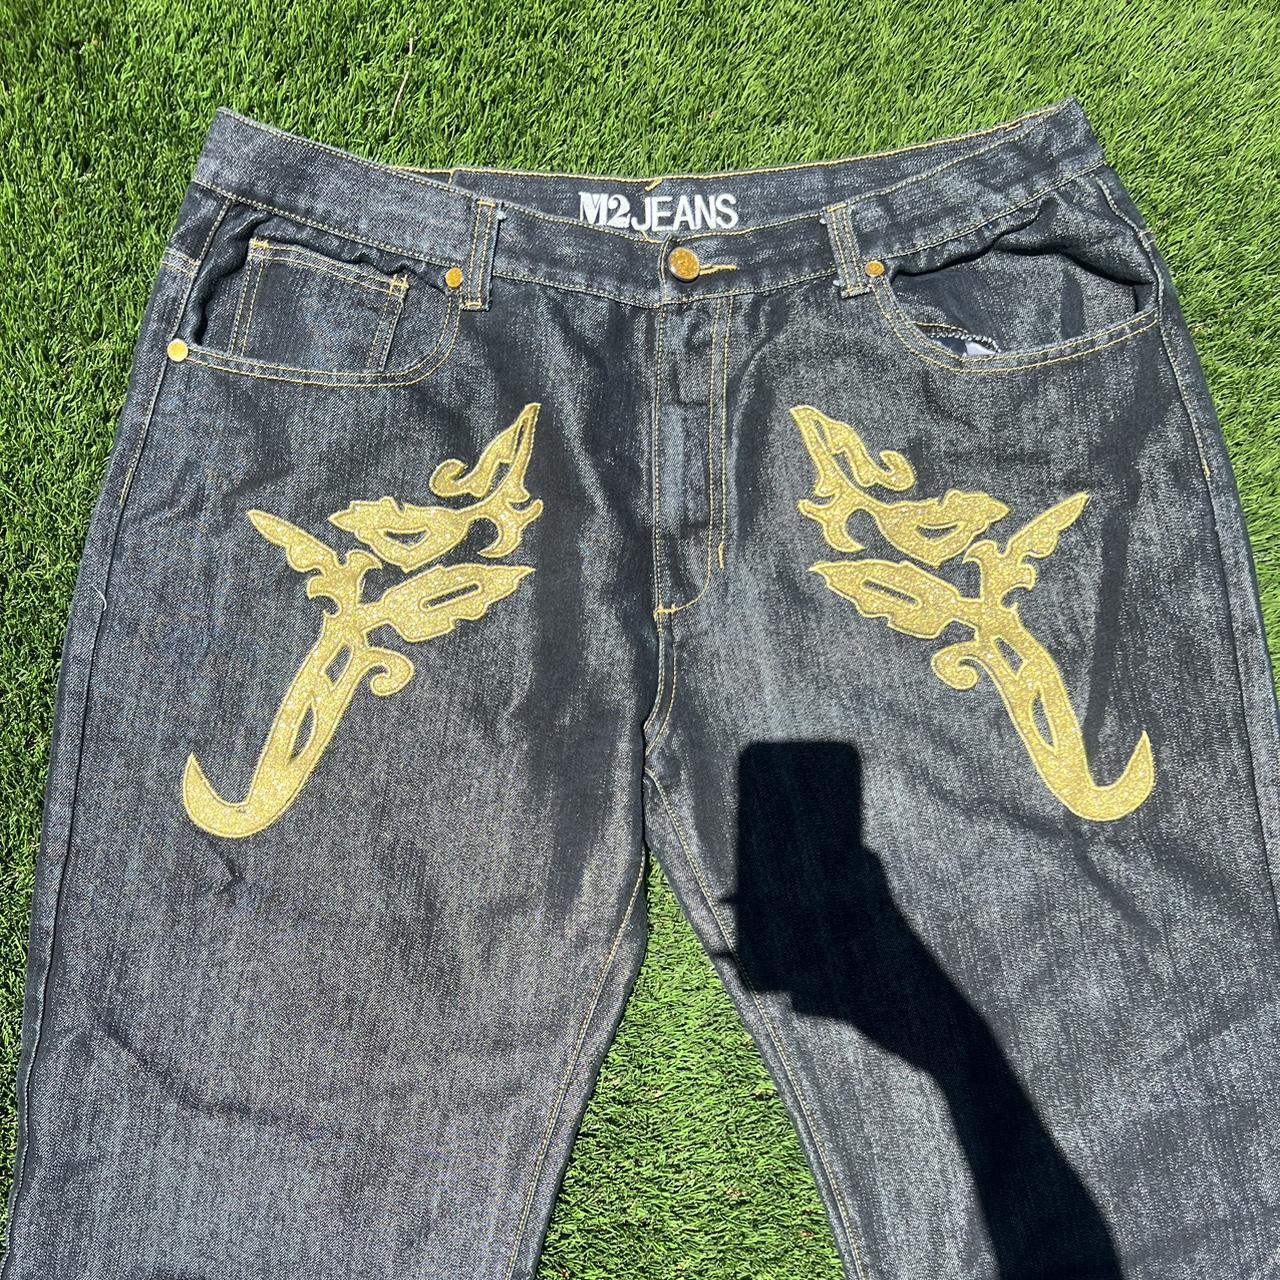 44x32 M2 jeans with gold design, nothing wrong with... - Depop